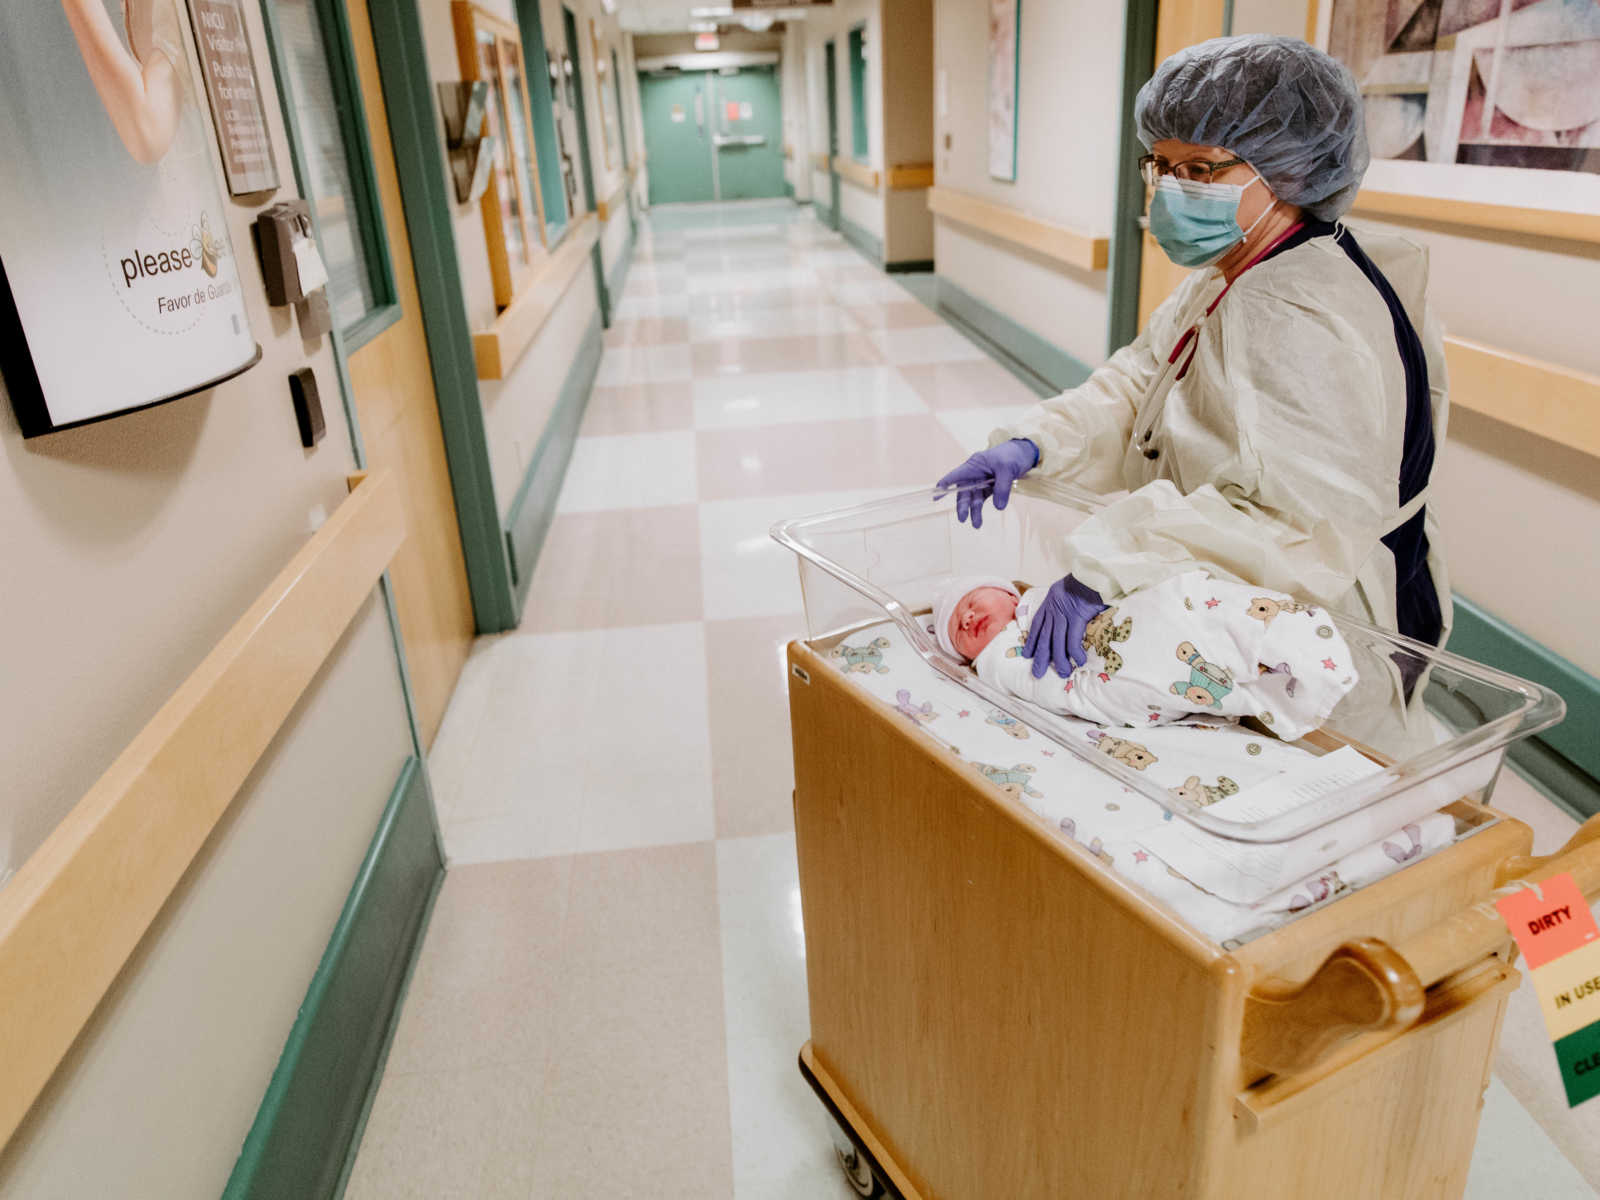 Nurse pushes baby who was born through c-section down the hospital hallway on cart with baby bed on it